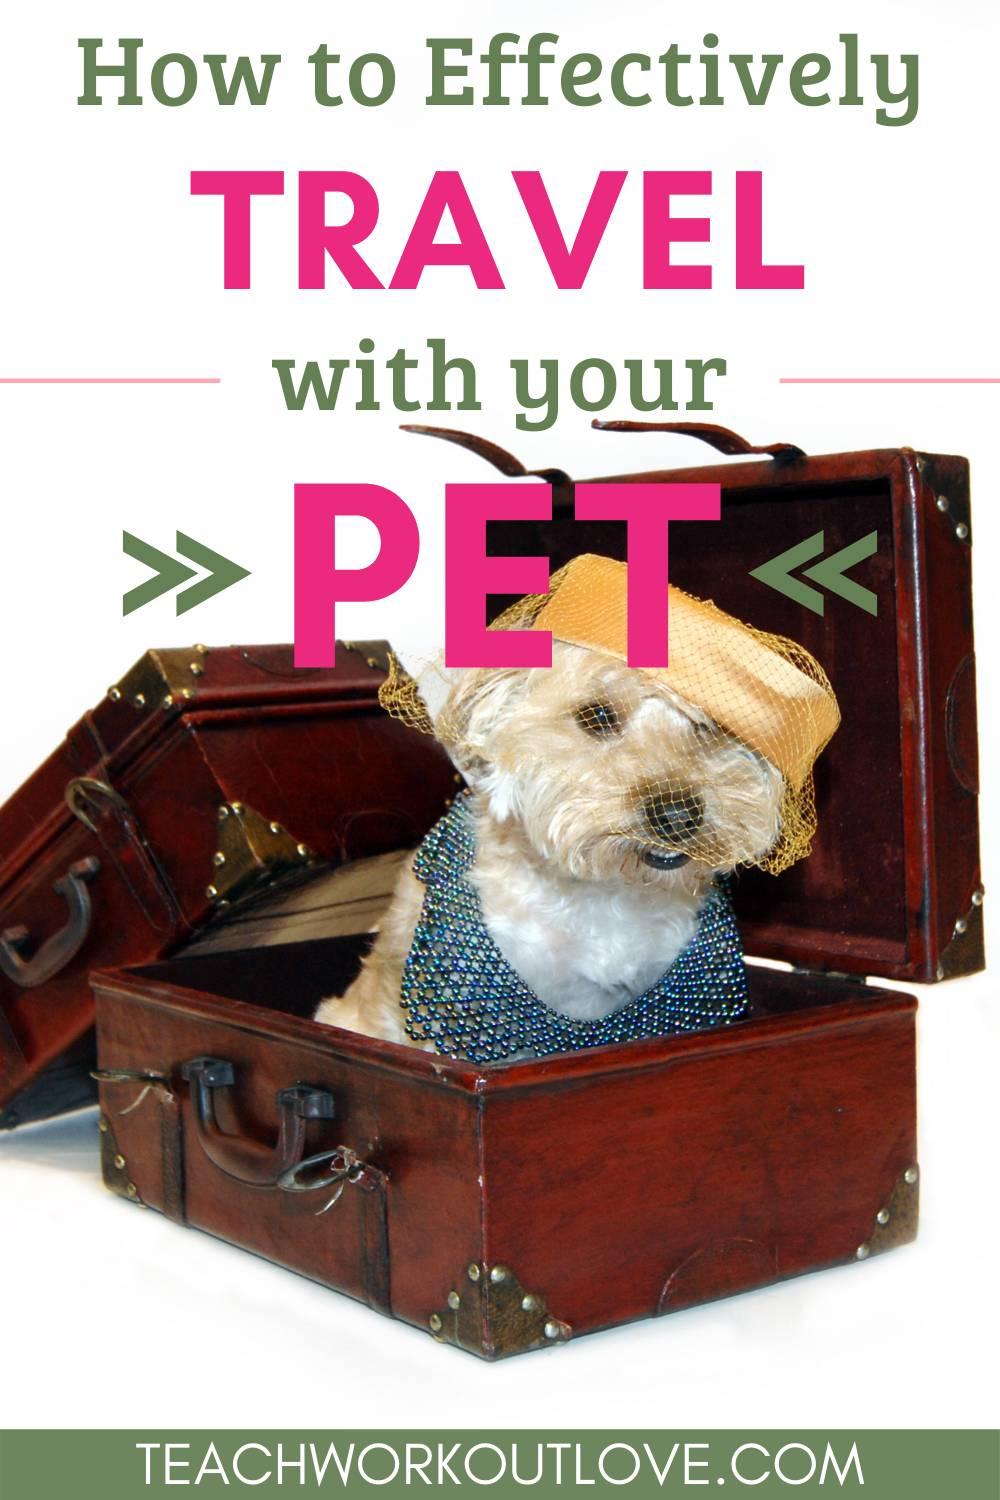 Will you be traveling with your pet soon? Here are a few tips to make traveling with your pet a little easier for everyone.